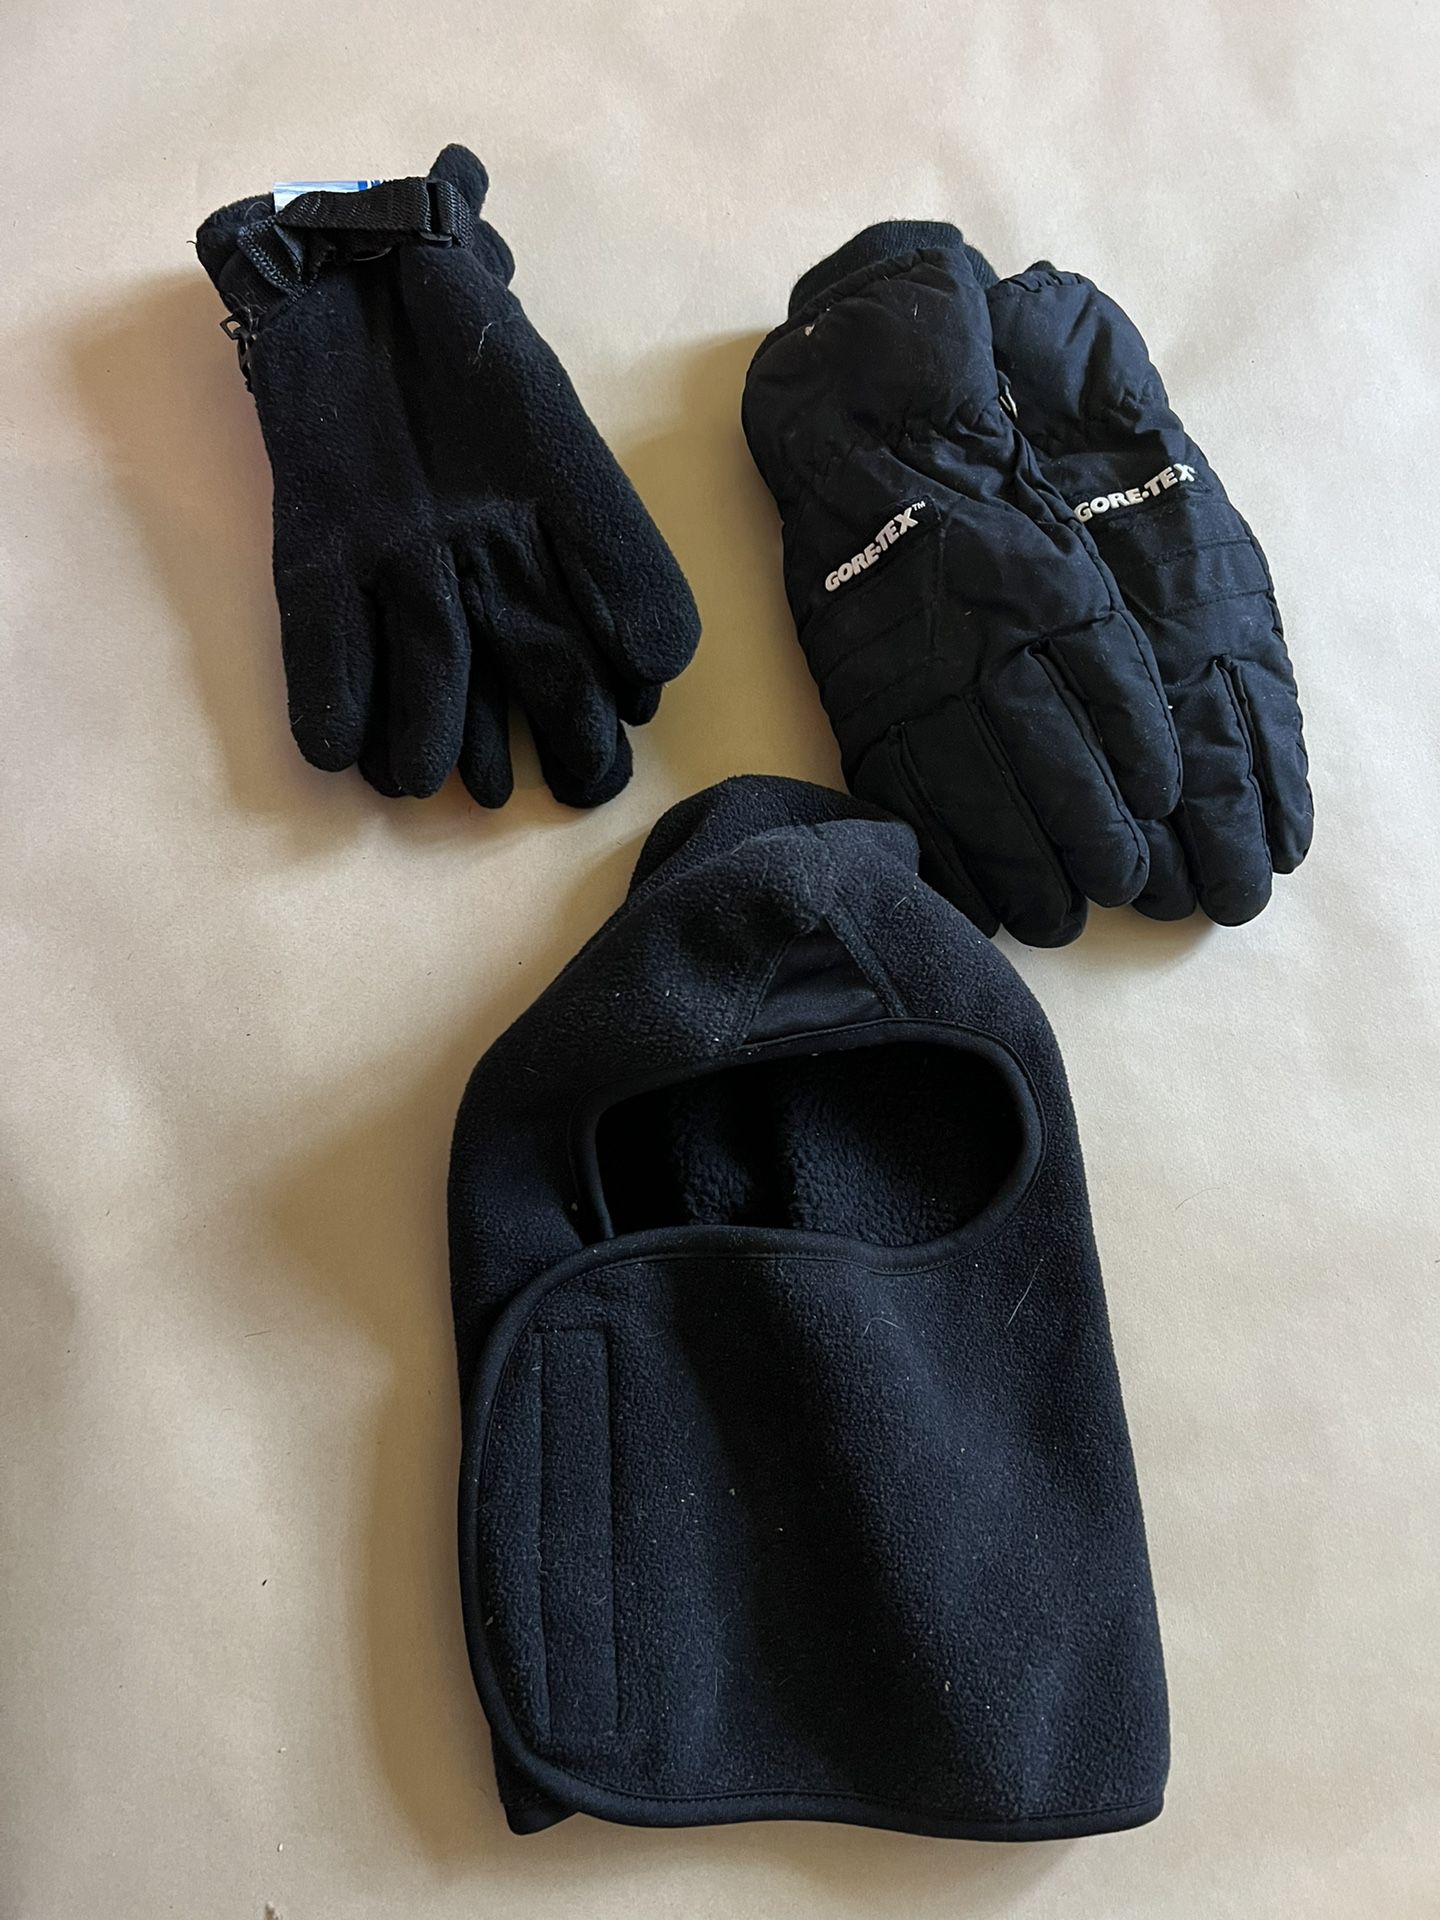 2 Winter Gloves And Winter Mask